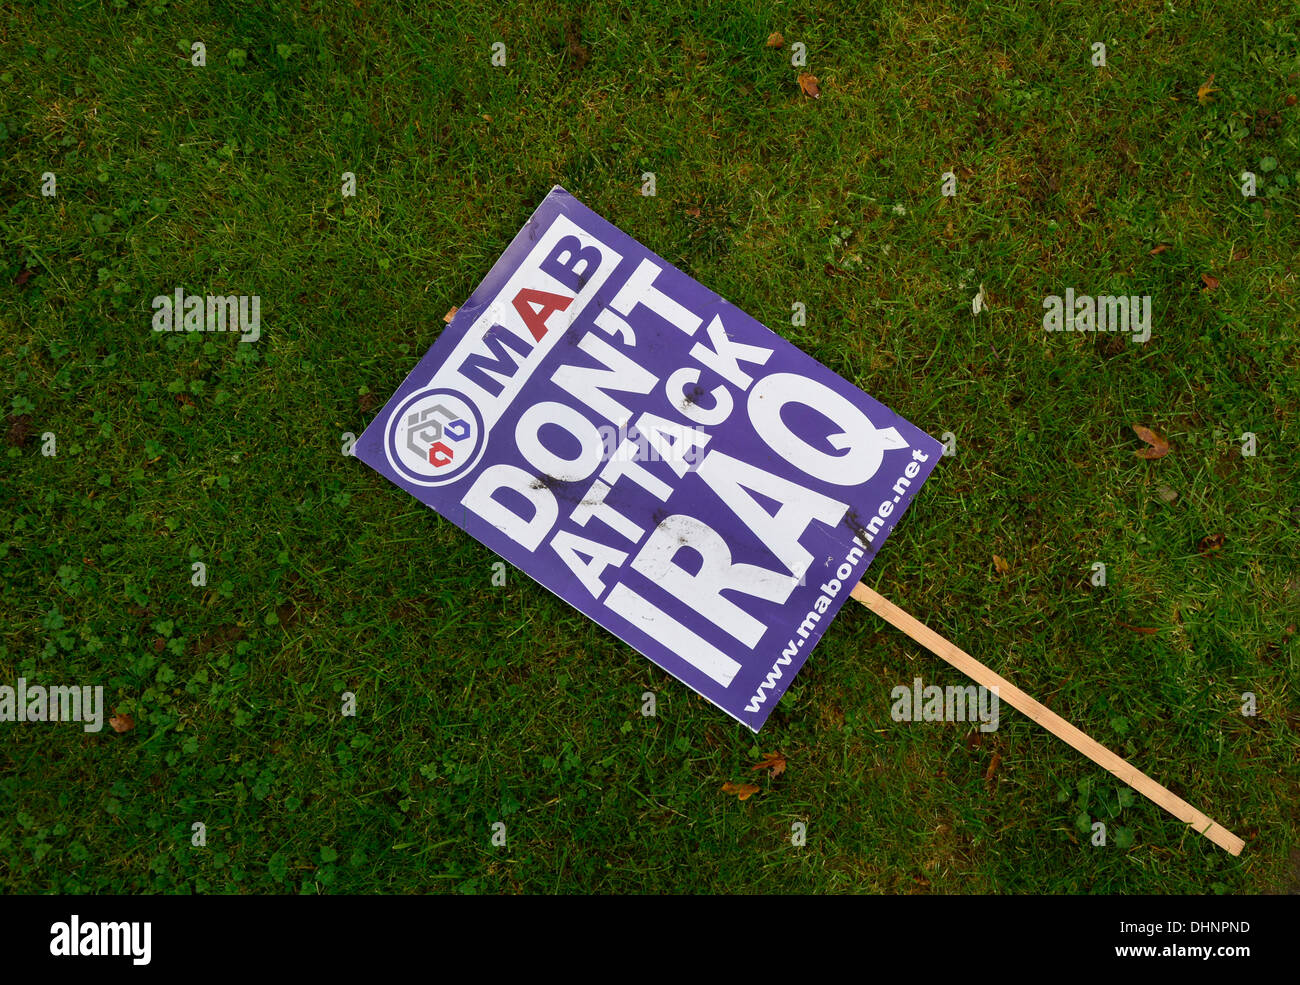 Anti war 'Don't attack Iraq' placard from 2003 protest march in London, UK. Stock Photo